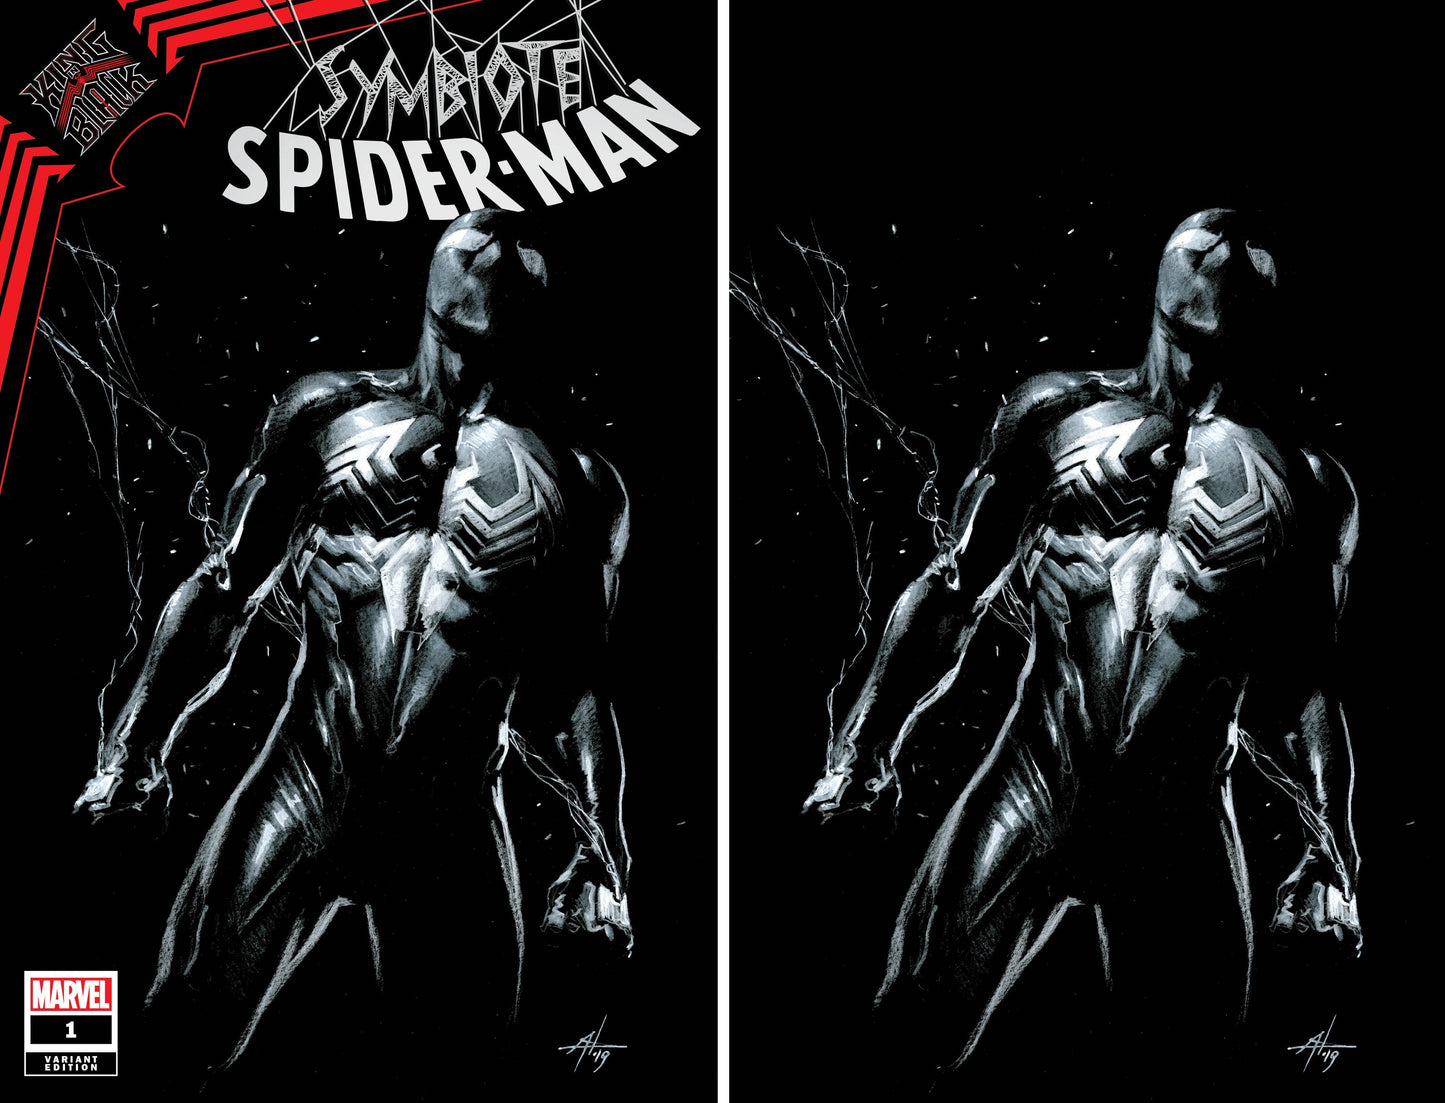 SYMBIOTE SPIDER-MAN KING IN BLACK #1 GABRIELLE DELL'OTTO TRADE/VIRGIN VARIANT SET LIMITED TO 700 SETS WITH NUMBERED COA